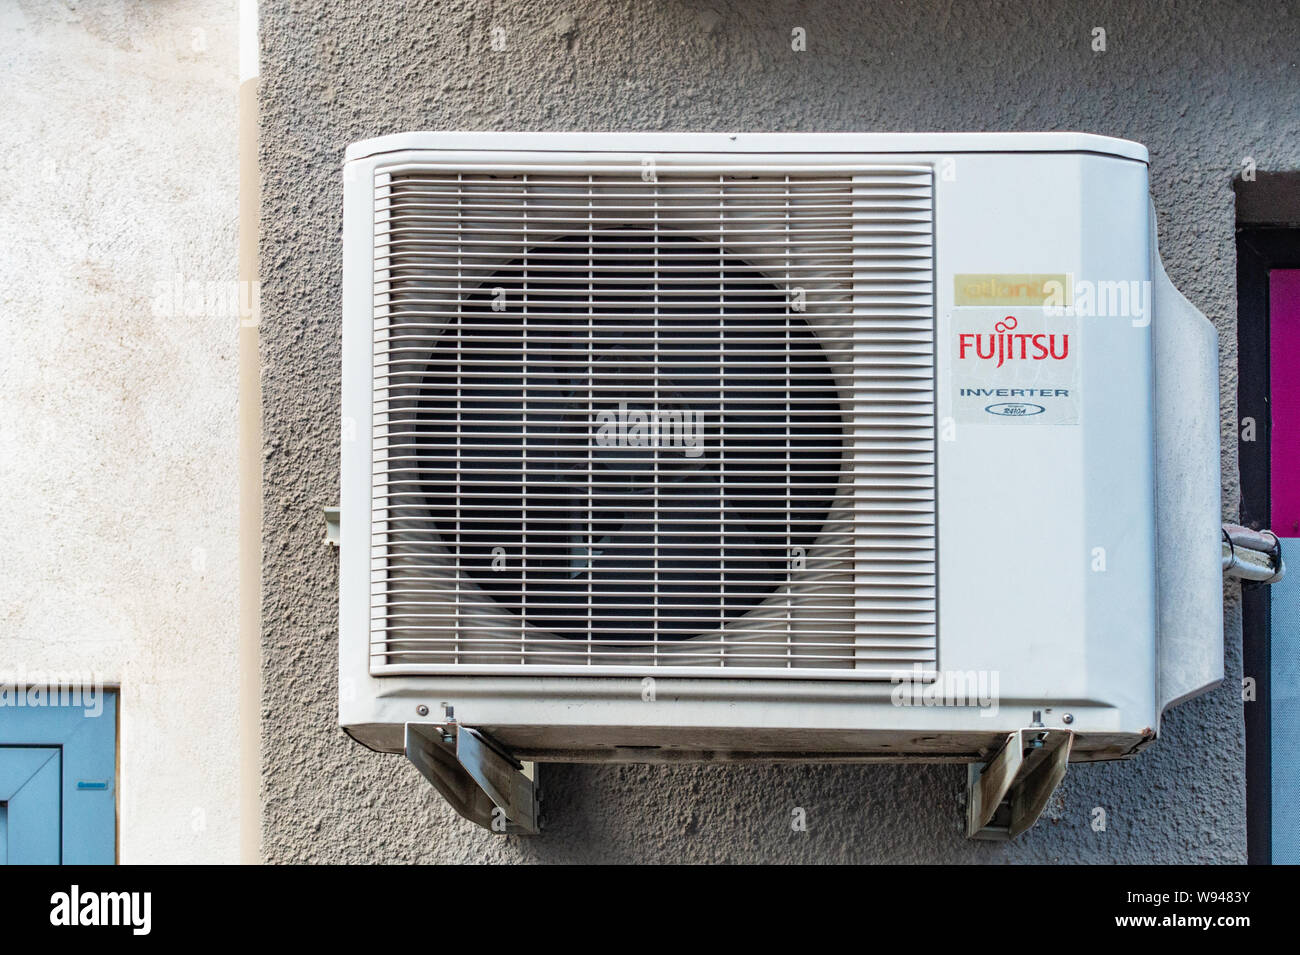 Fujitsu Air Conditioning Unit on outside of office wall Stock Photo